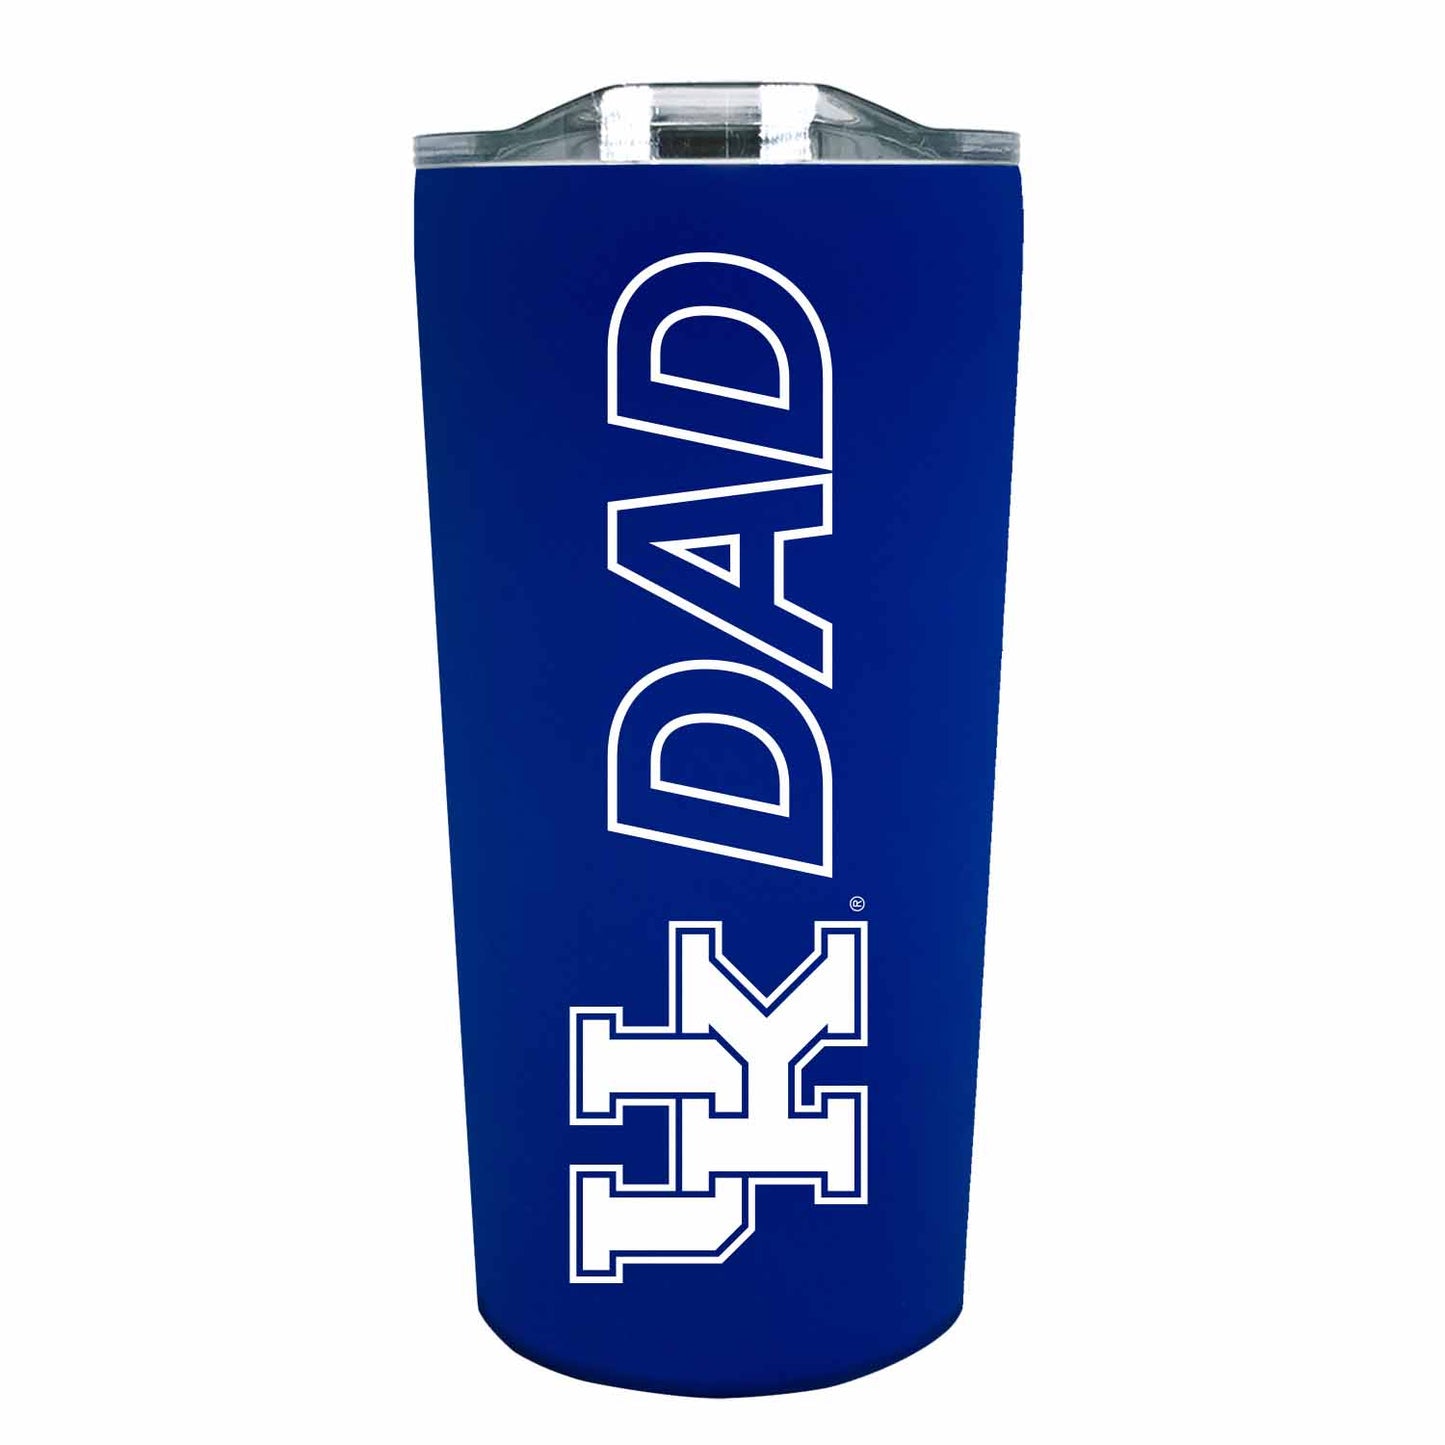 Kentucky Wildcats NCAA Stainless Steel Travel Tumbler for Dad - Royal